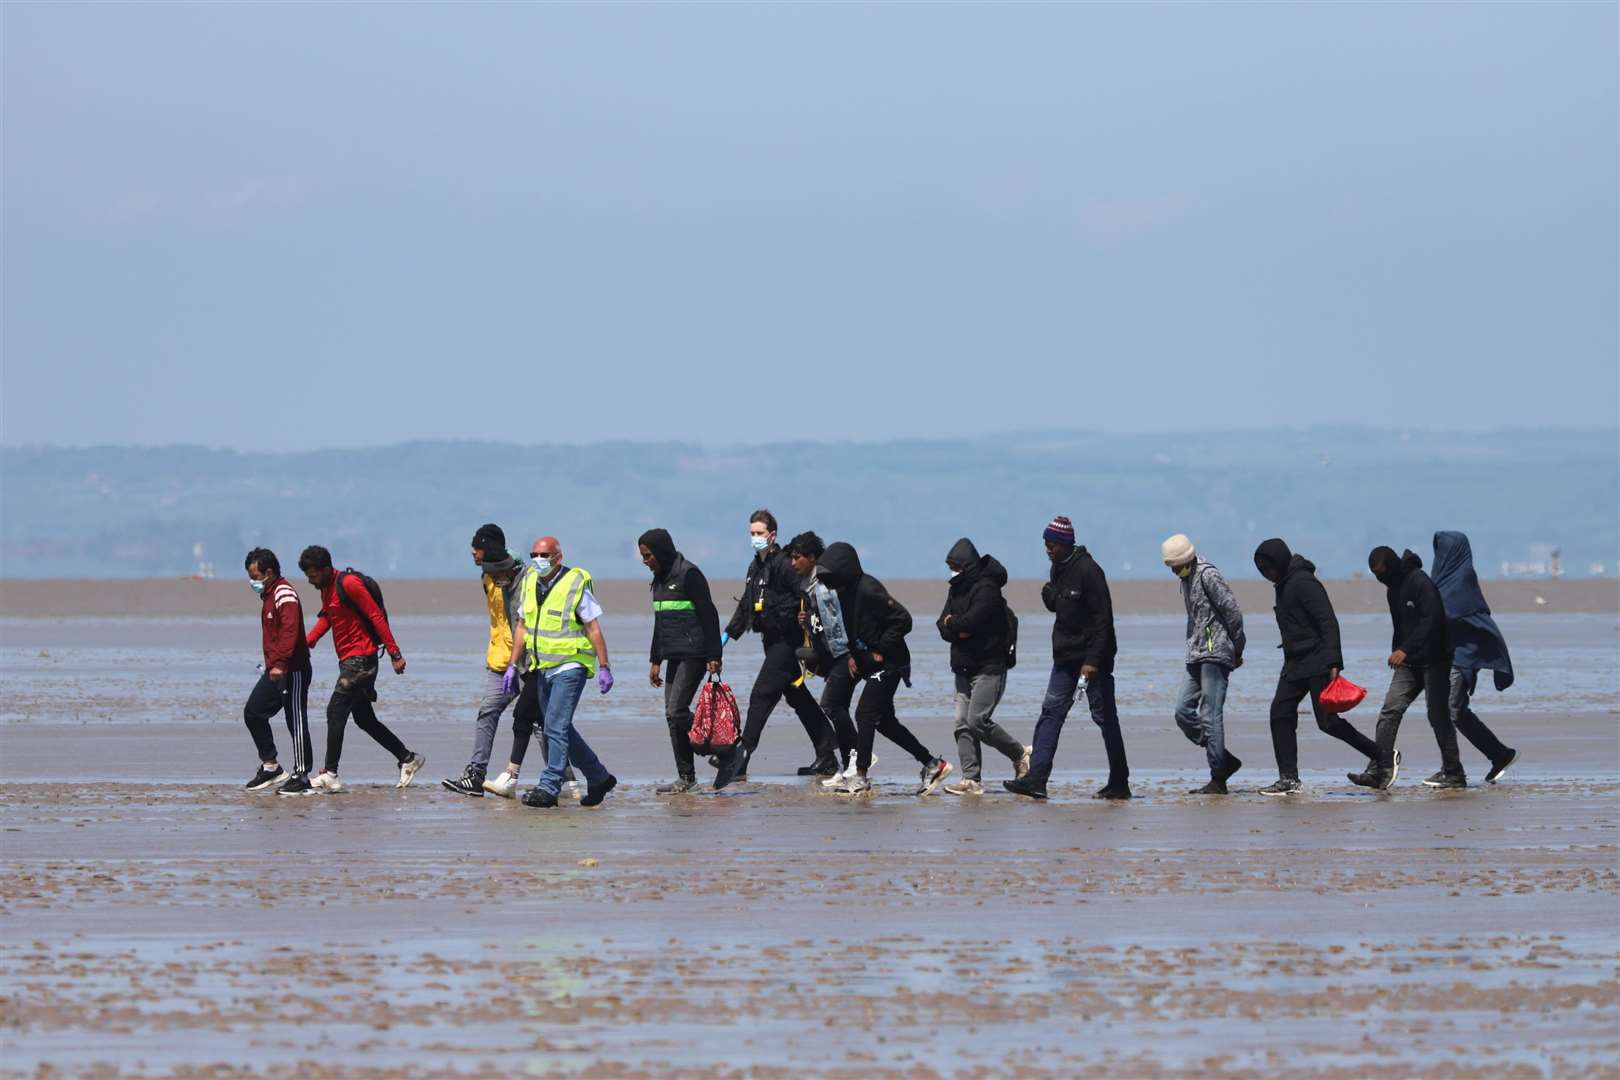 The pressures put on Kent by the surge in asylum seekers have been intense